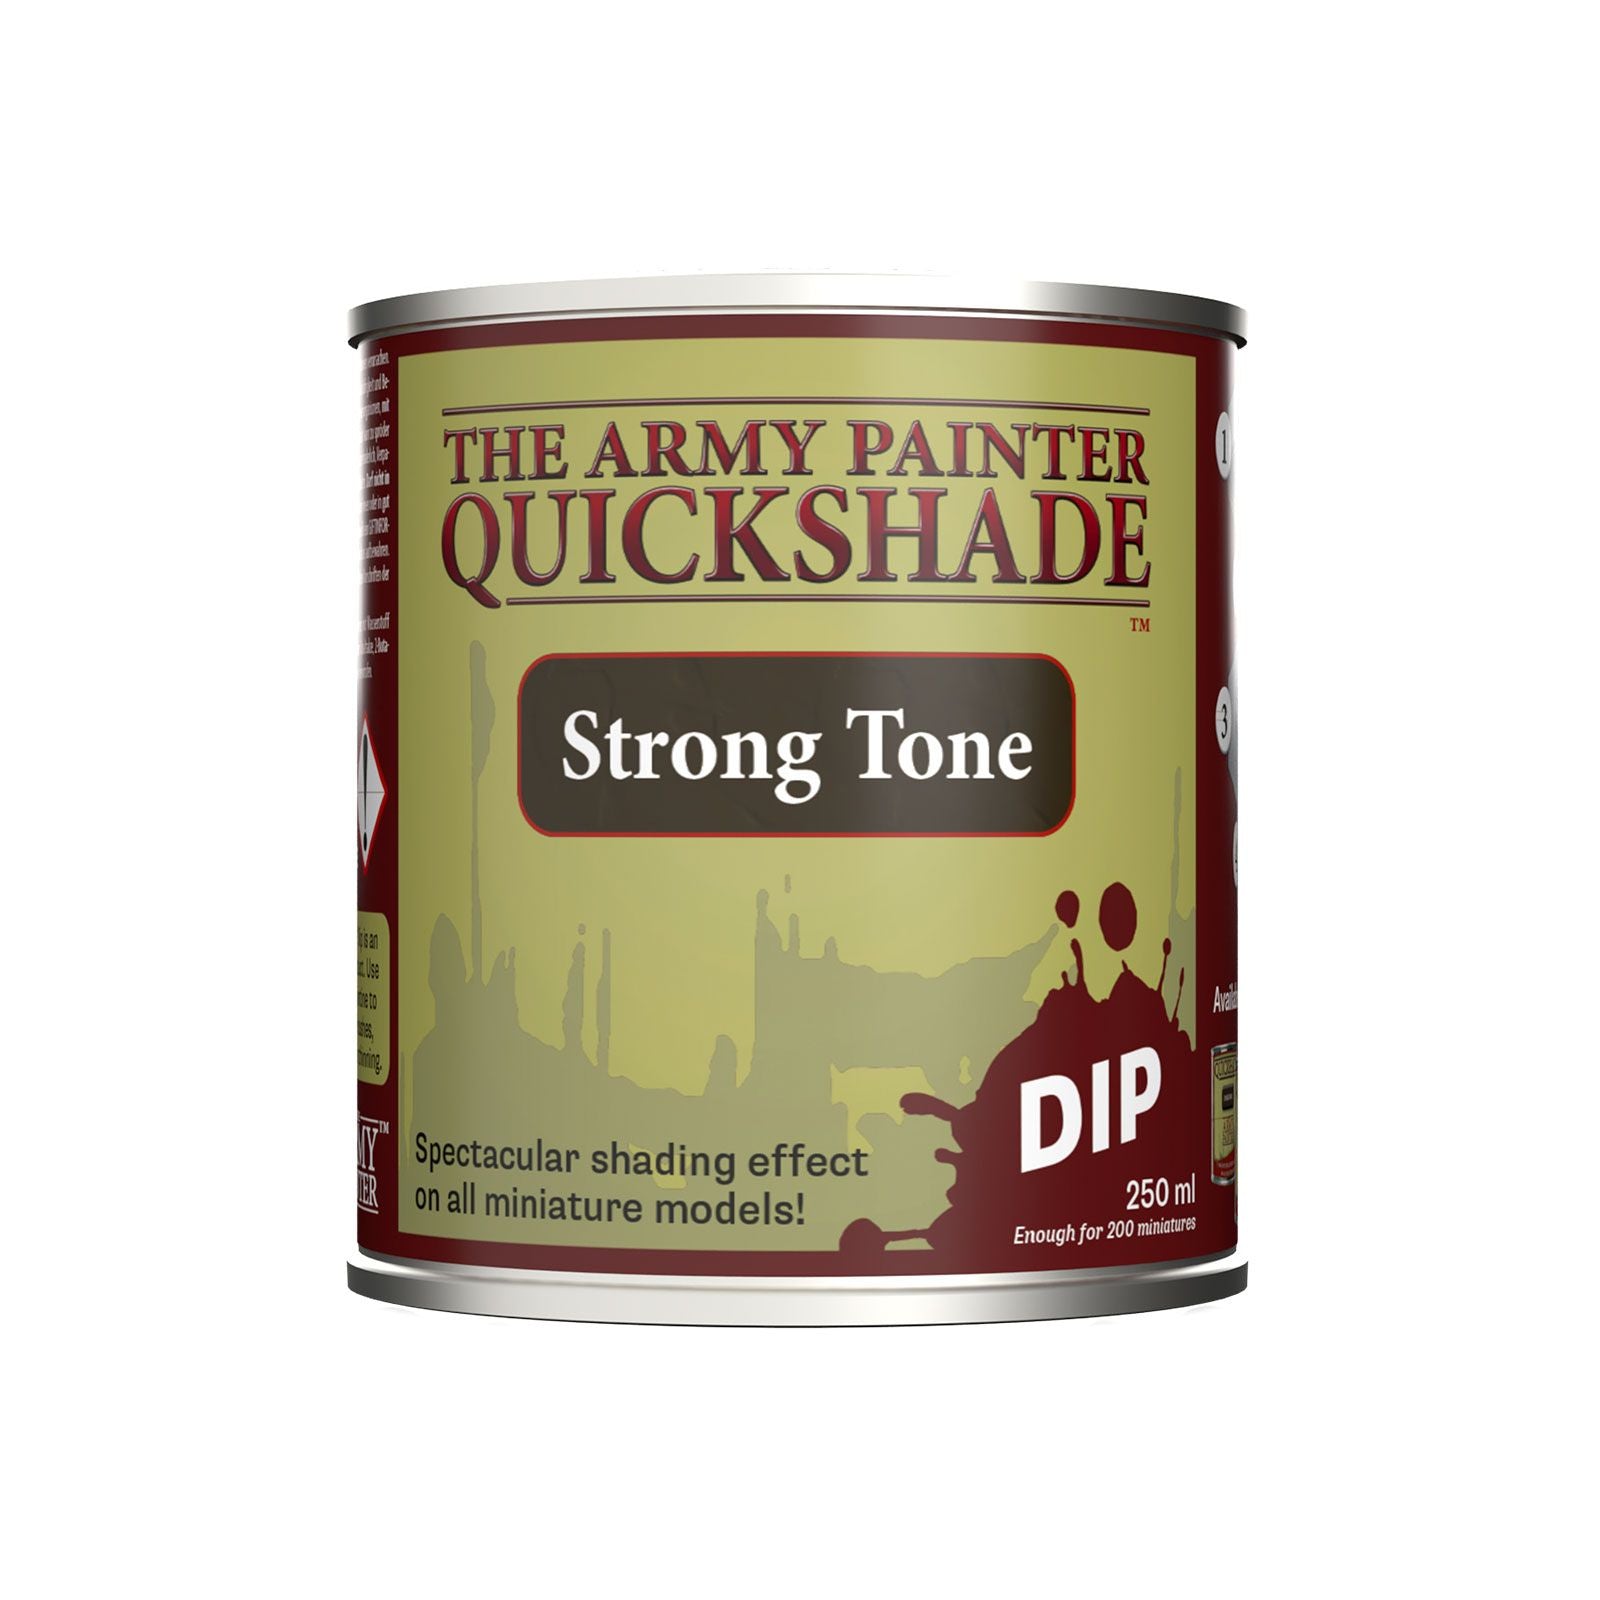 Army Painter Quickshade Strong Tone Dip 250ml | Impulse Games and Hobbies